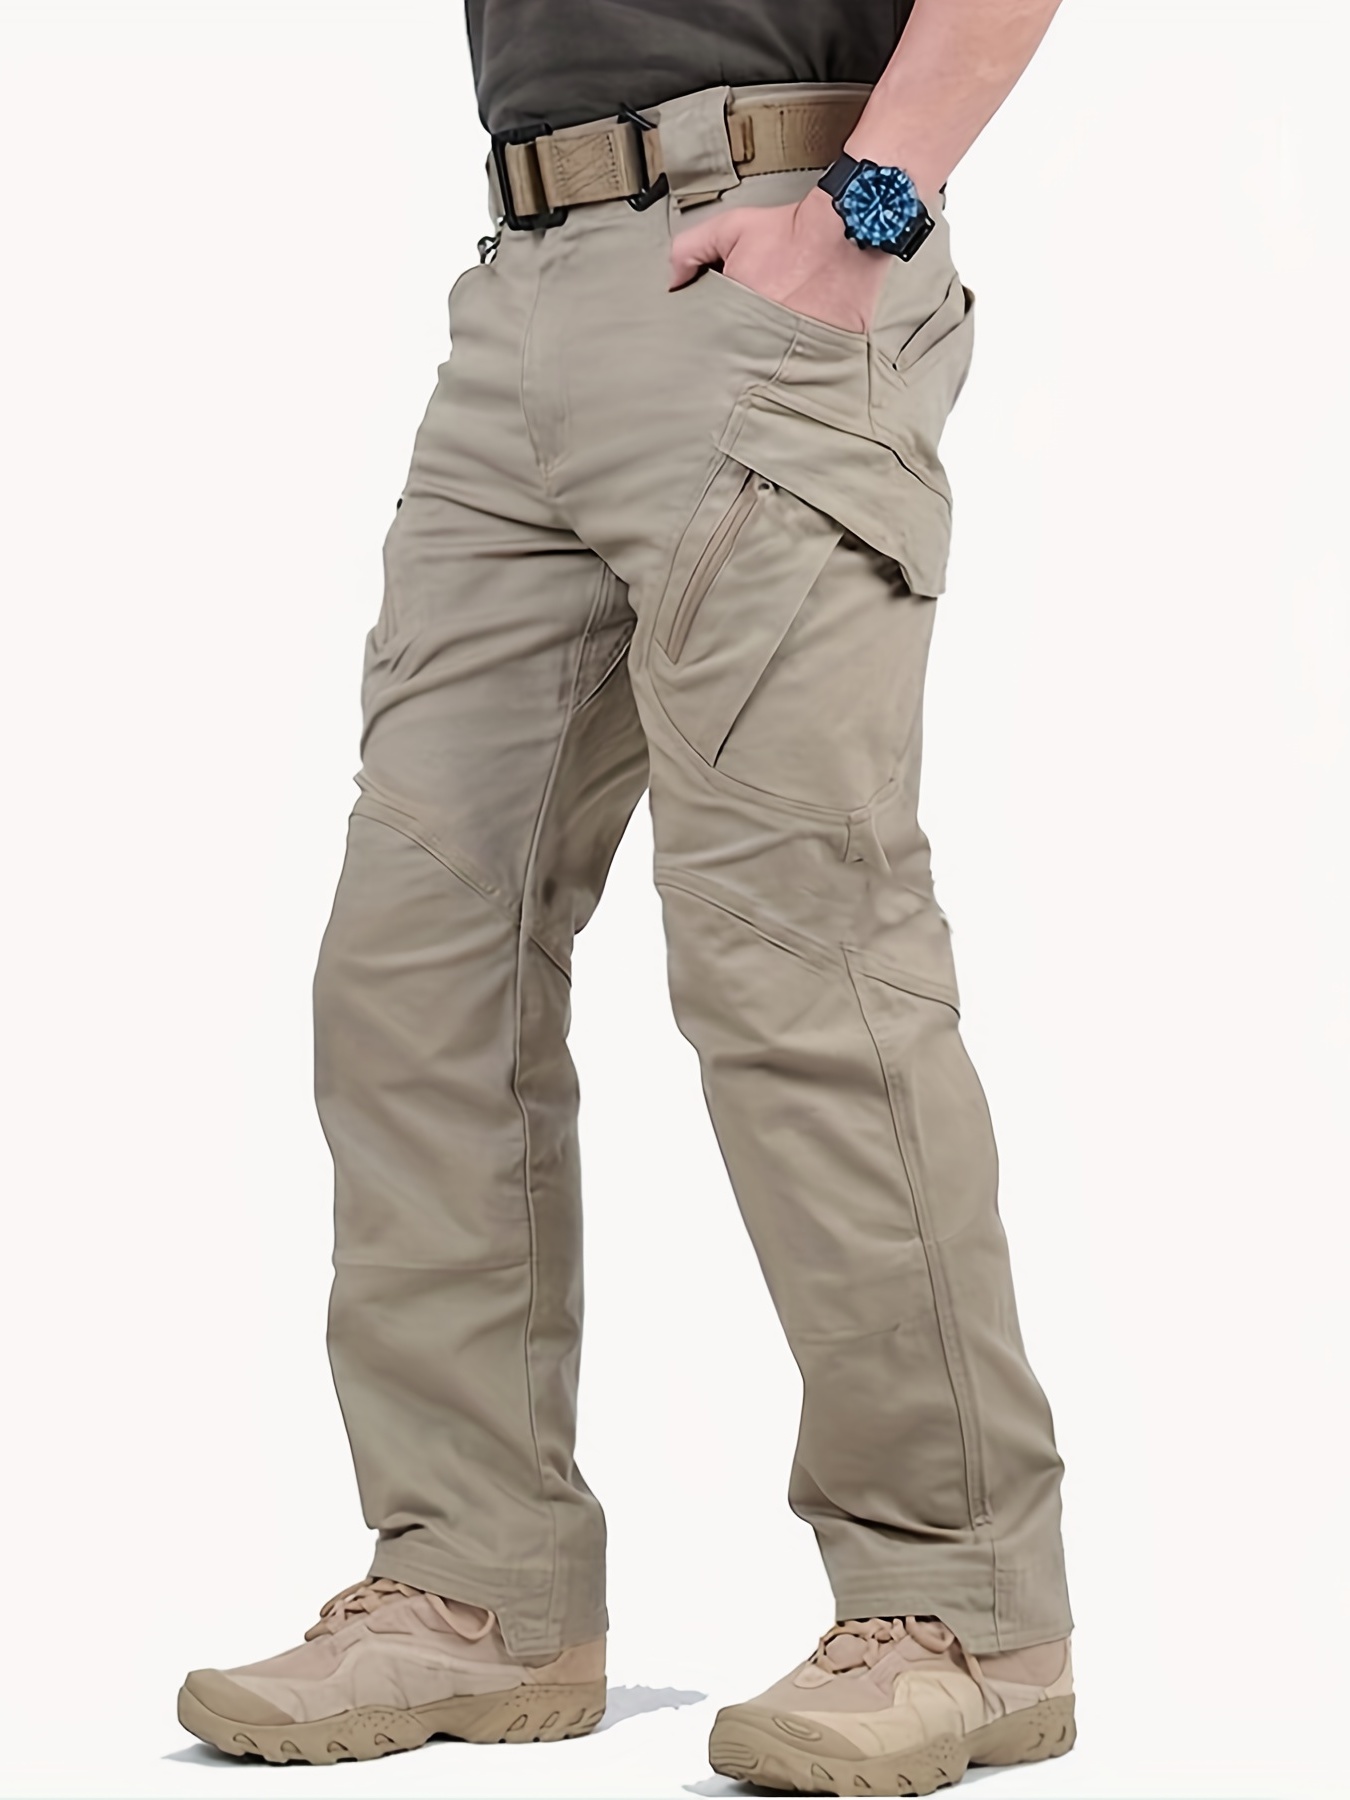 mens casual cargo pants with zipper pockets male joggers for spring and fall outdoor